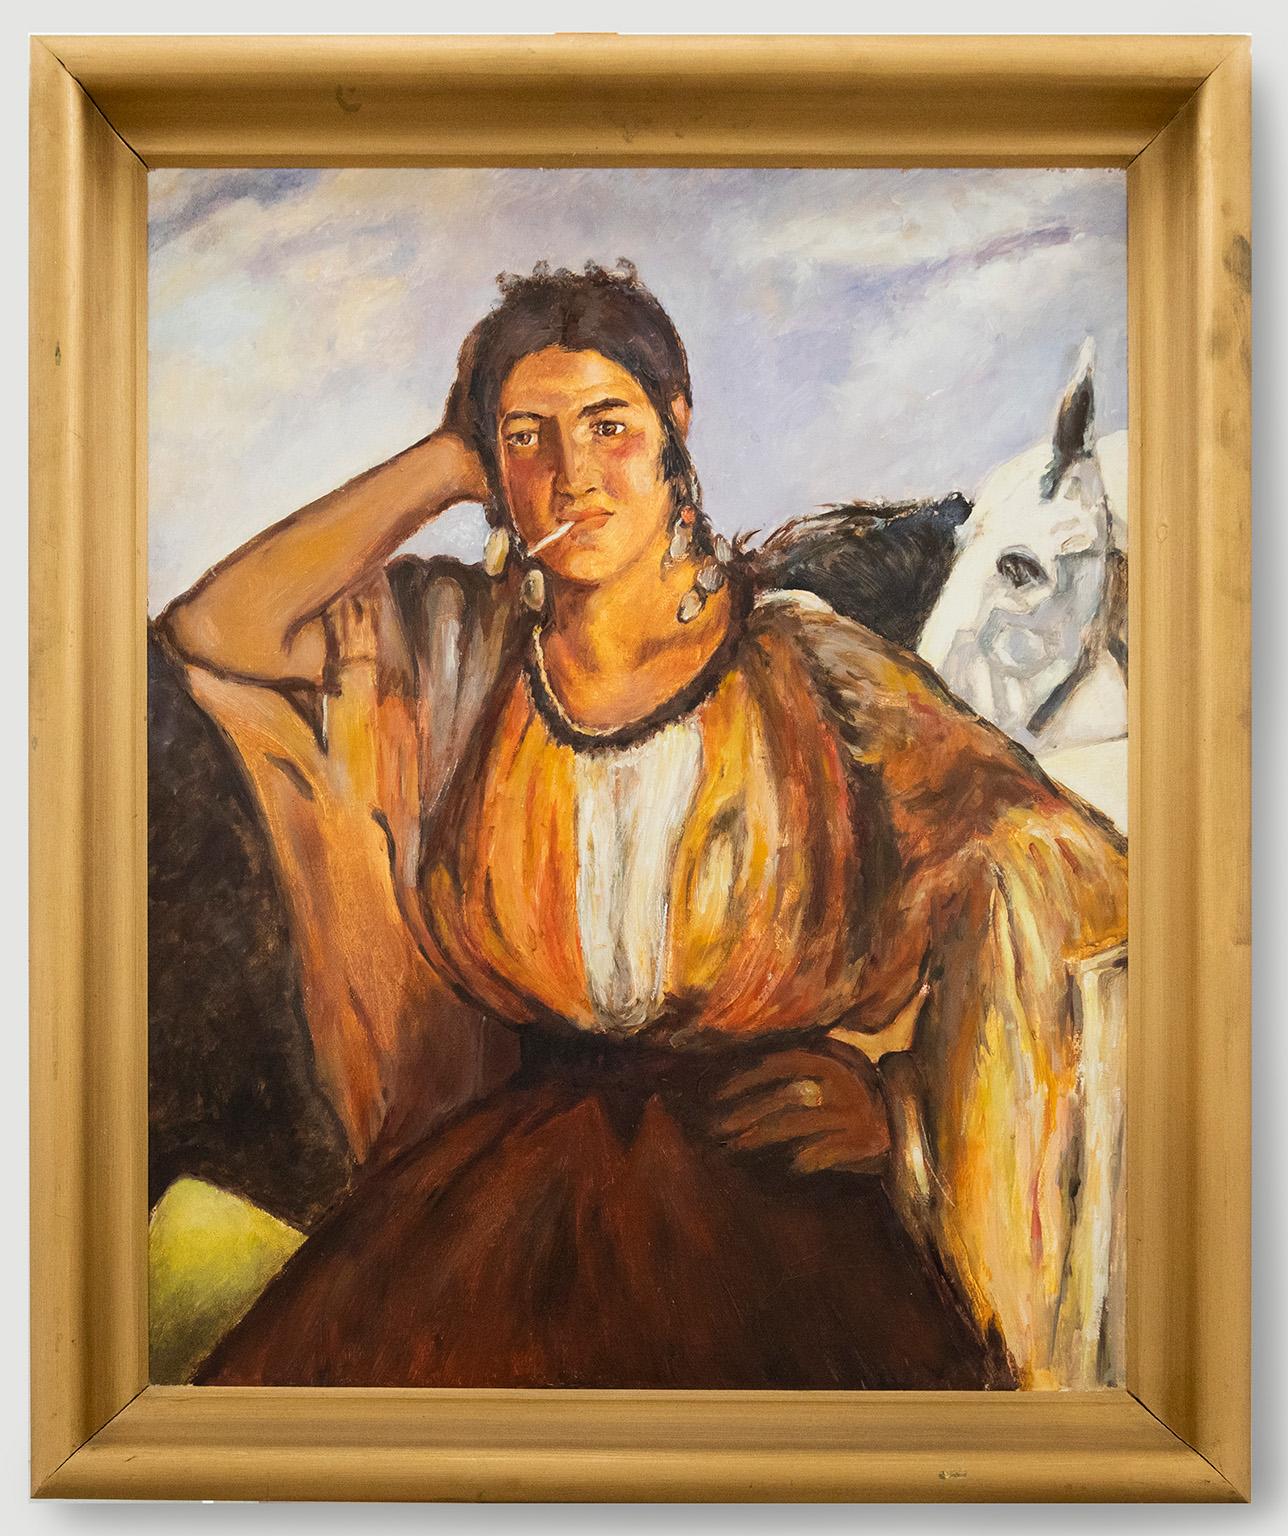 Unknown Portrait Painting - After Edouard Manet - Framed 1998 Oil, Gypsy with a Cigarette